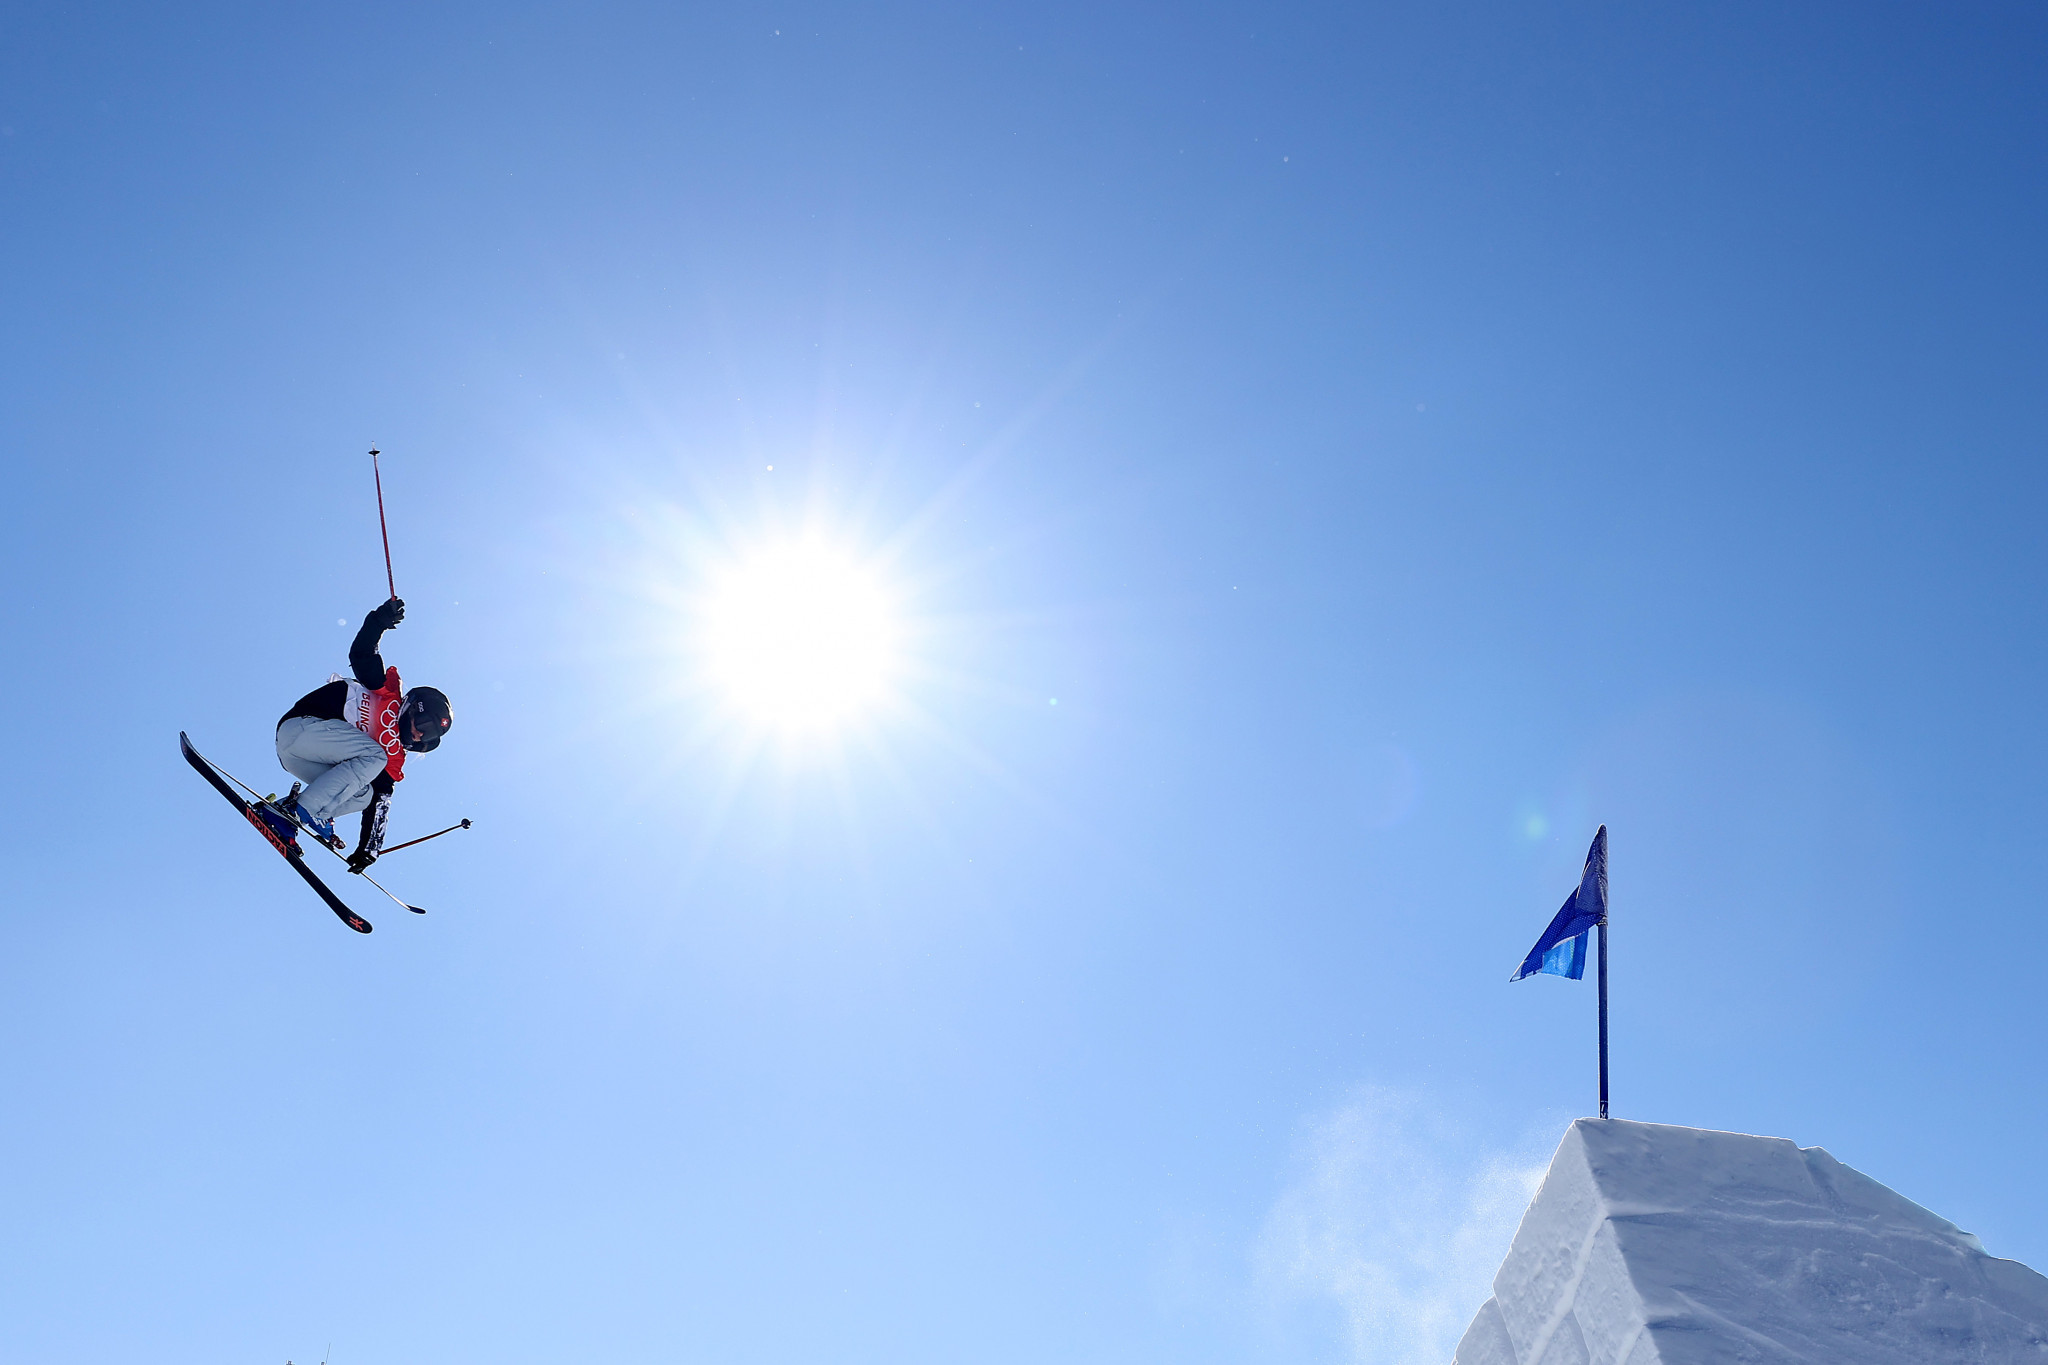 Slopestyle athletes have been left frustrated again in Bakuriani ©Getty Images